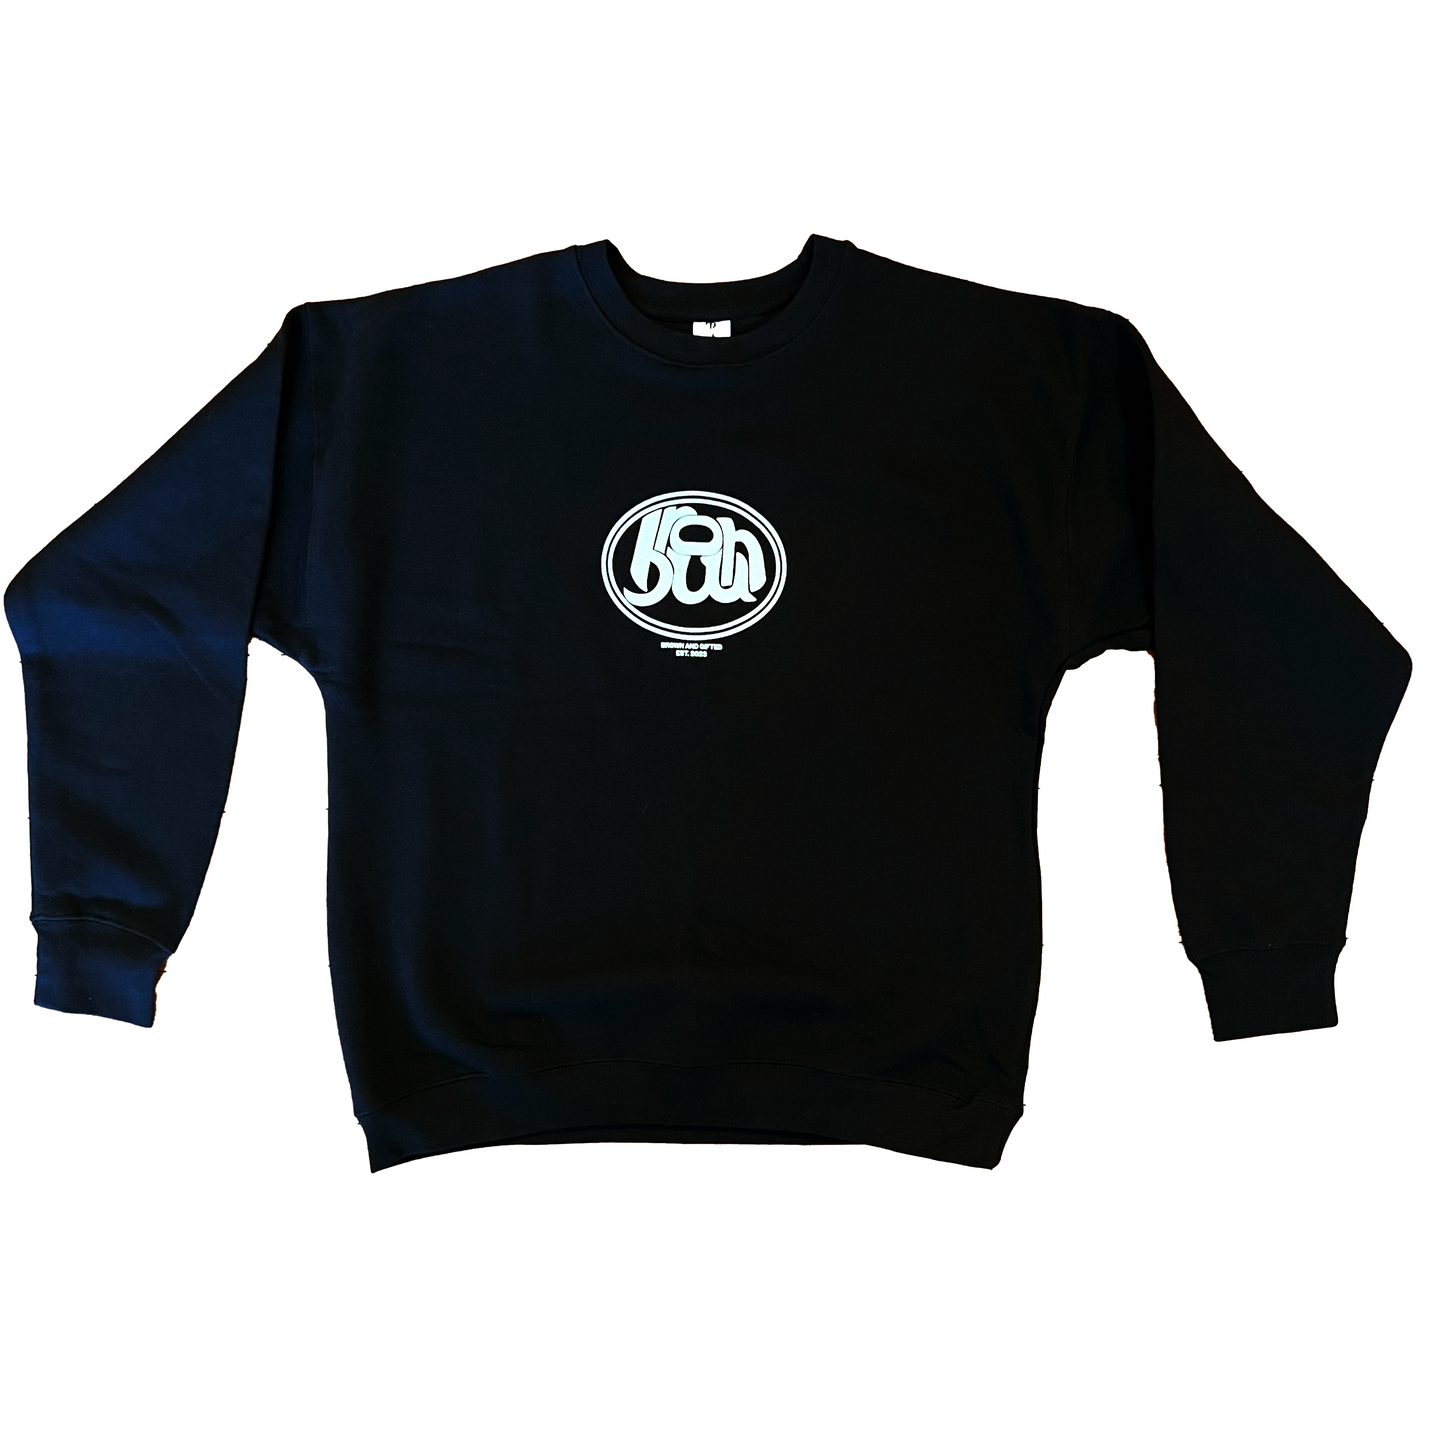 Brown and Gifted "Surfer" Crewneck Sweater (Black) (Size Large)